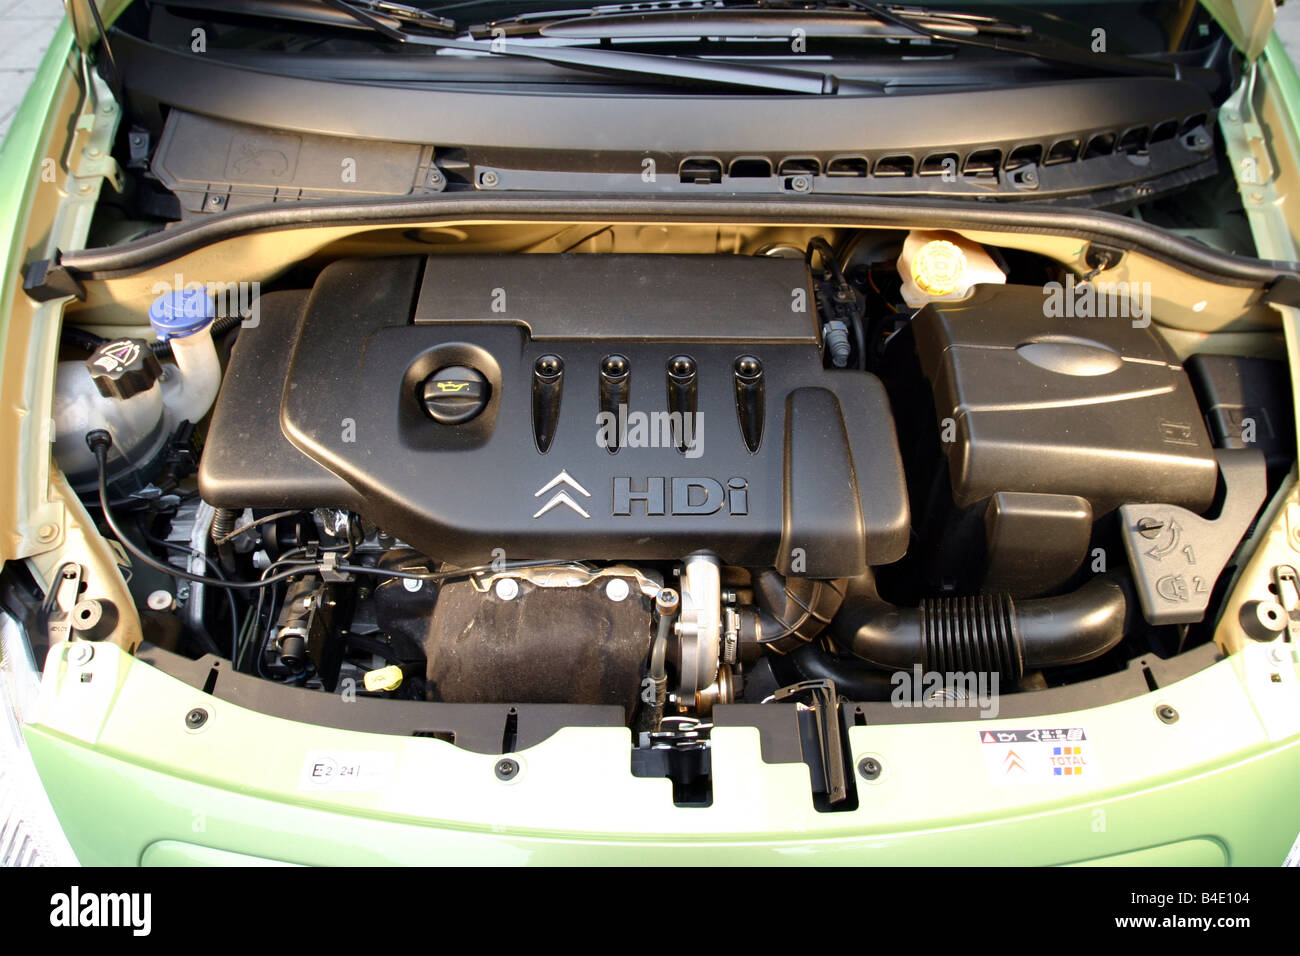 Car, Citroen C3 1.4 Hdi, Limousine, Small Approx., Model Year 2002-, Green, View In Engine Compartment, Technique/Accessory, Acc Stock Photo - Alamy